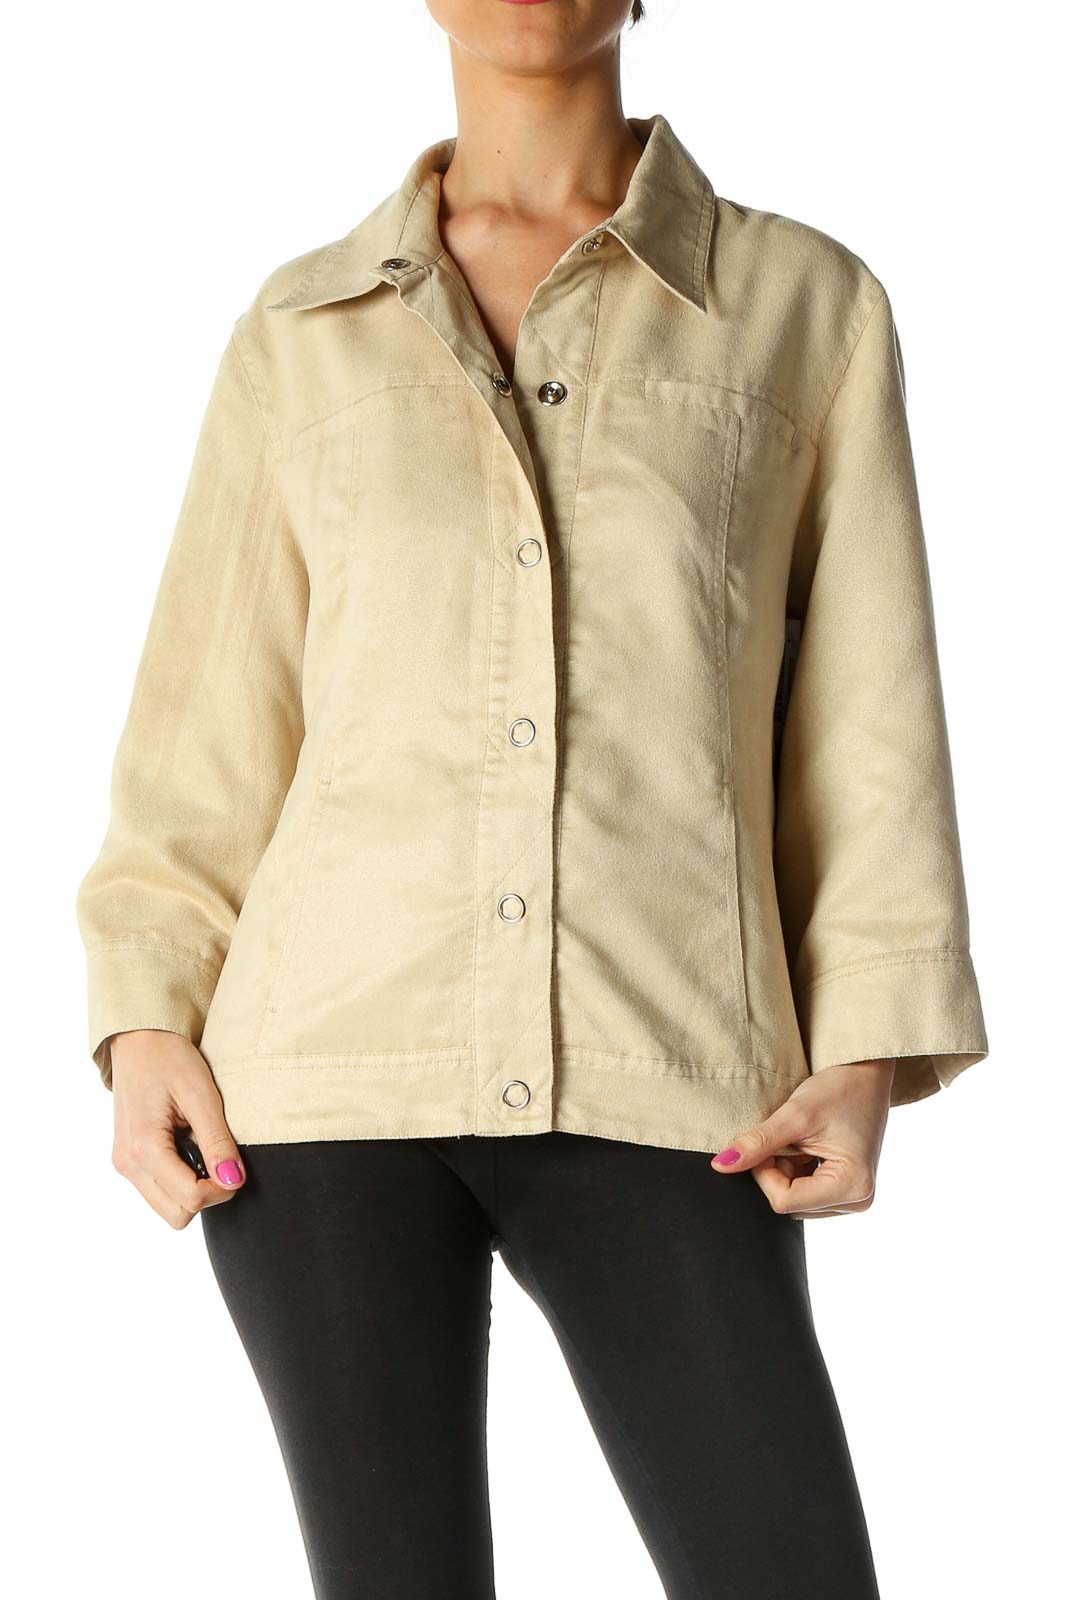 Beige Solid Casual Shirt Front